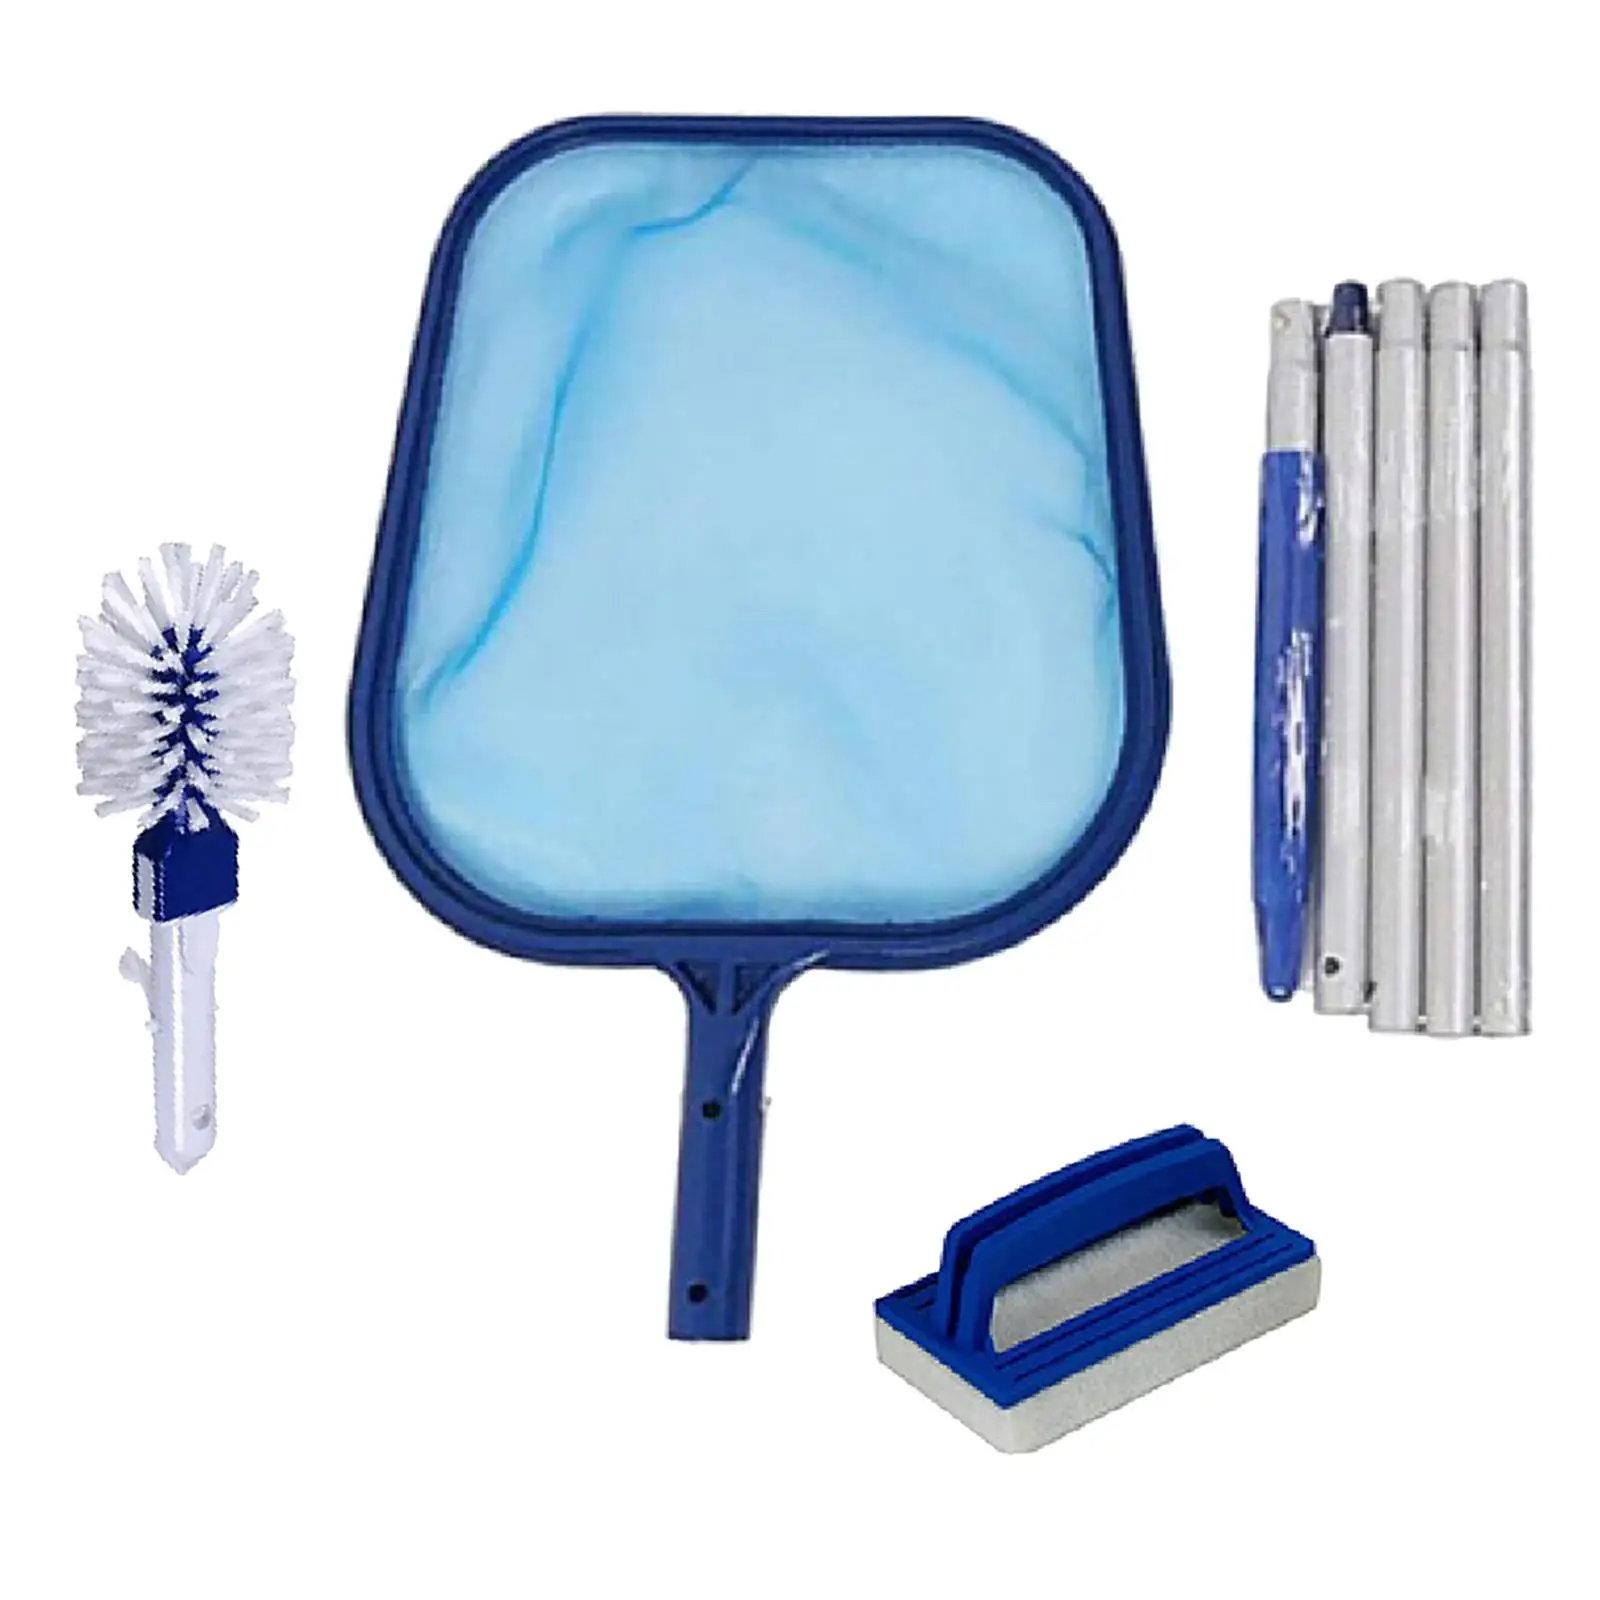 Swimming Pool Cleaning Set   Brush Fine Mesh Netting  Maintenance for Above Ground Pools Fountains